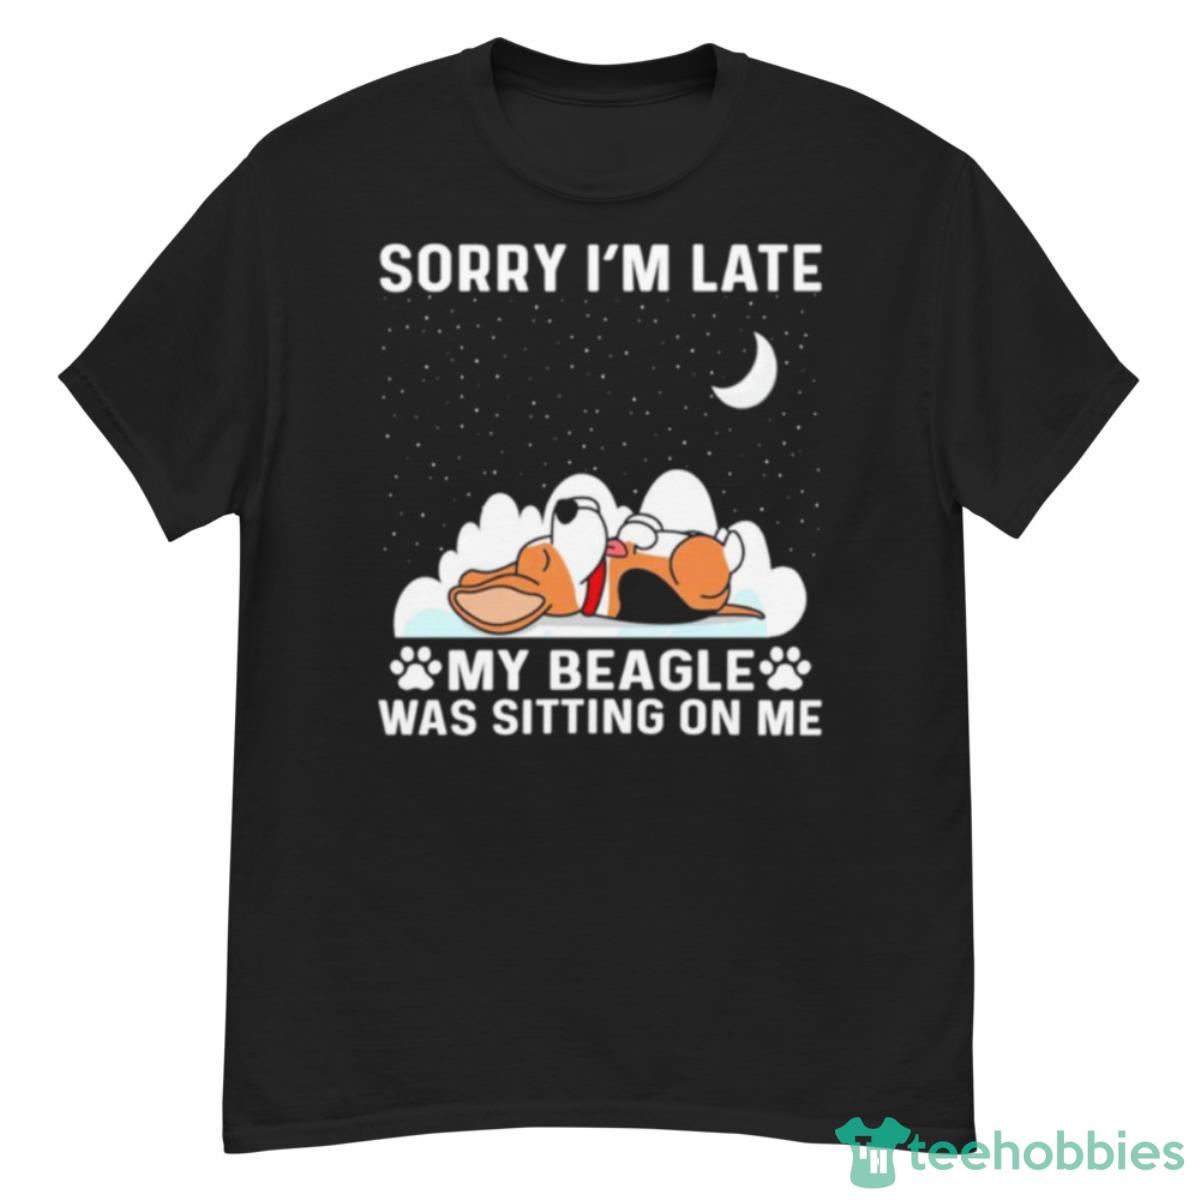 Dog Sorry I’m Late My Beagle Was Sitting One Me Shirt - G500 Men’s Classic T-Shirt